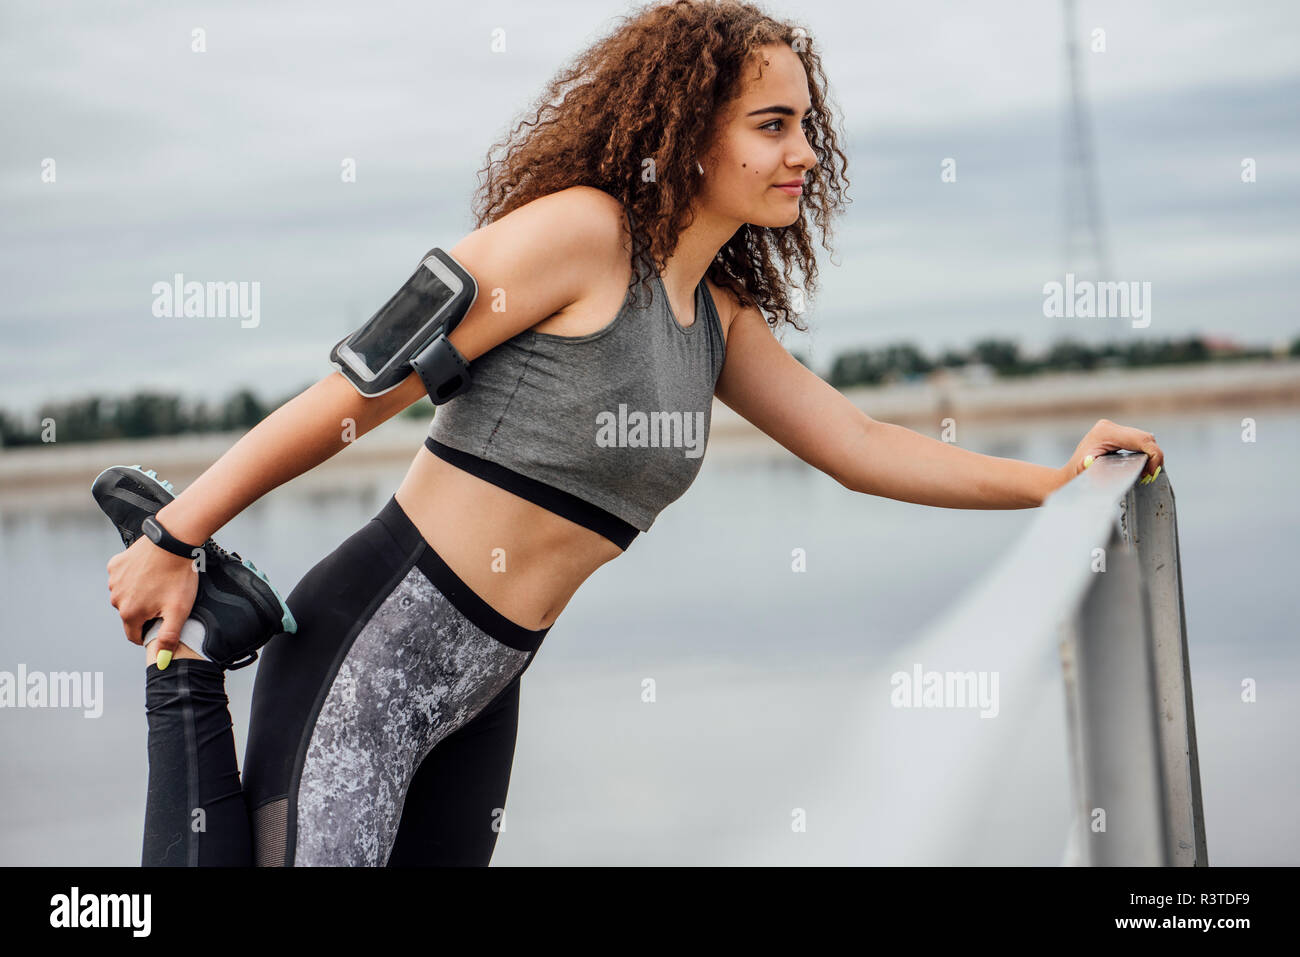 Female Athlete Women's Sportswear Fit Thin Physique Athletic Build Outdoor  City River Stock Photo, Picture and Royalty Free Image. Image 58390789.